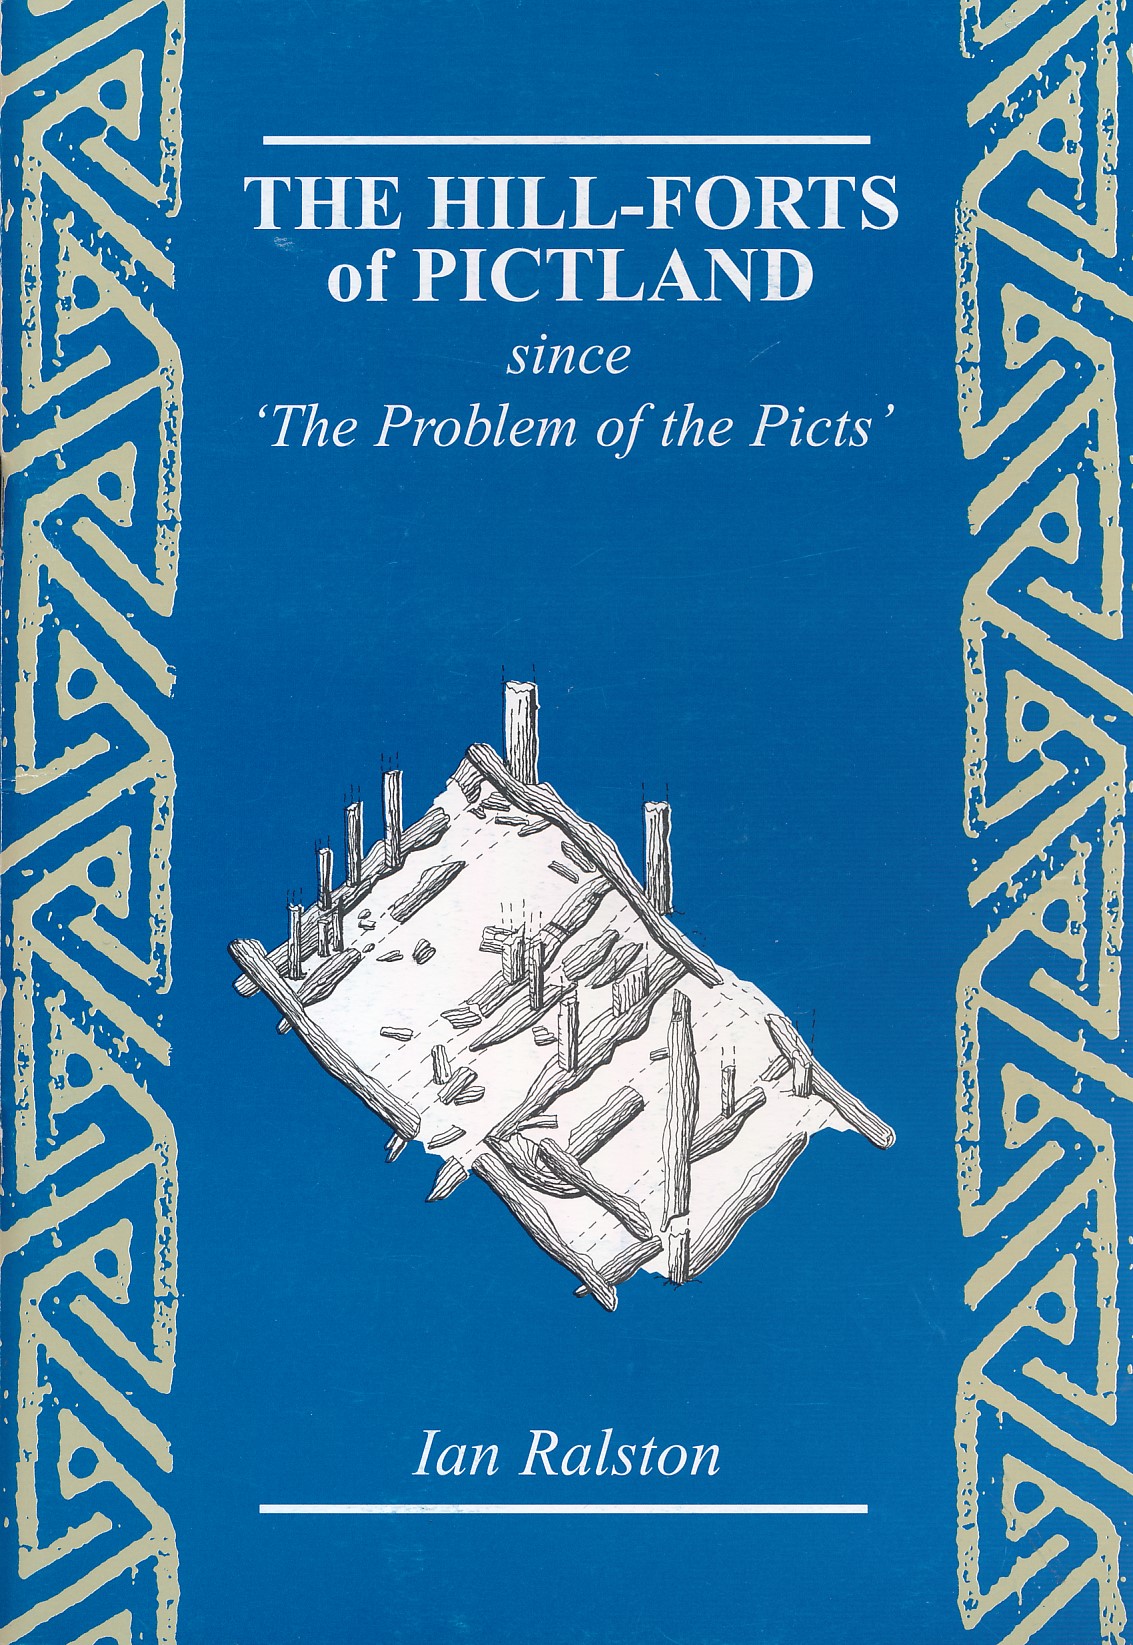 The Hill-forts of Pictland Since 'The Problem of the Picts'